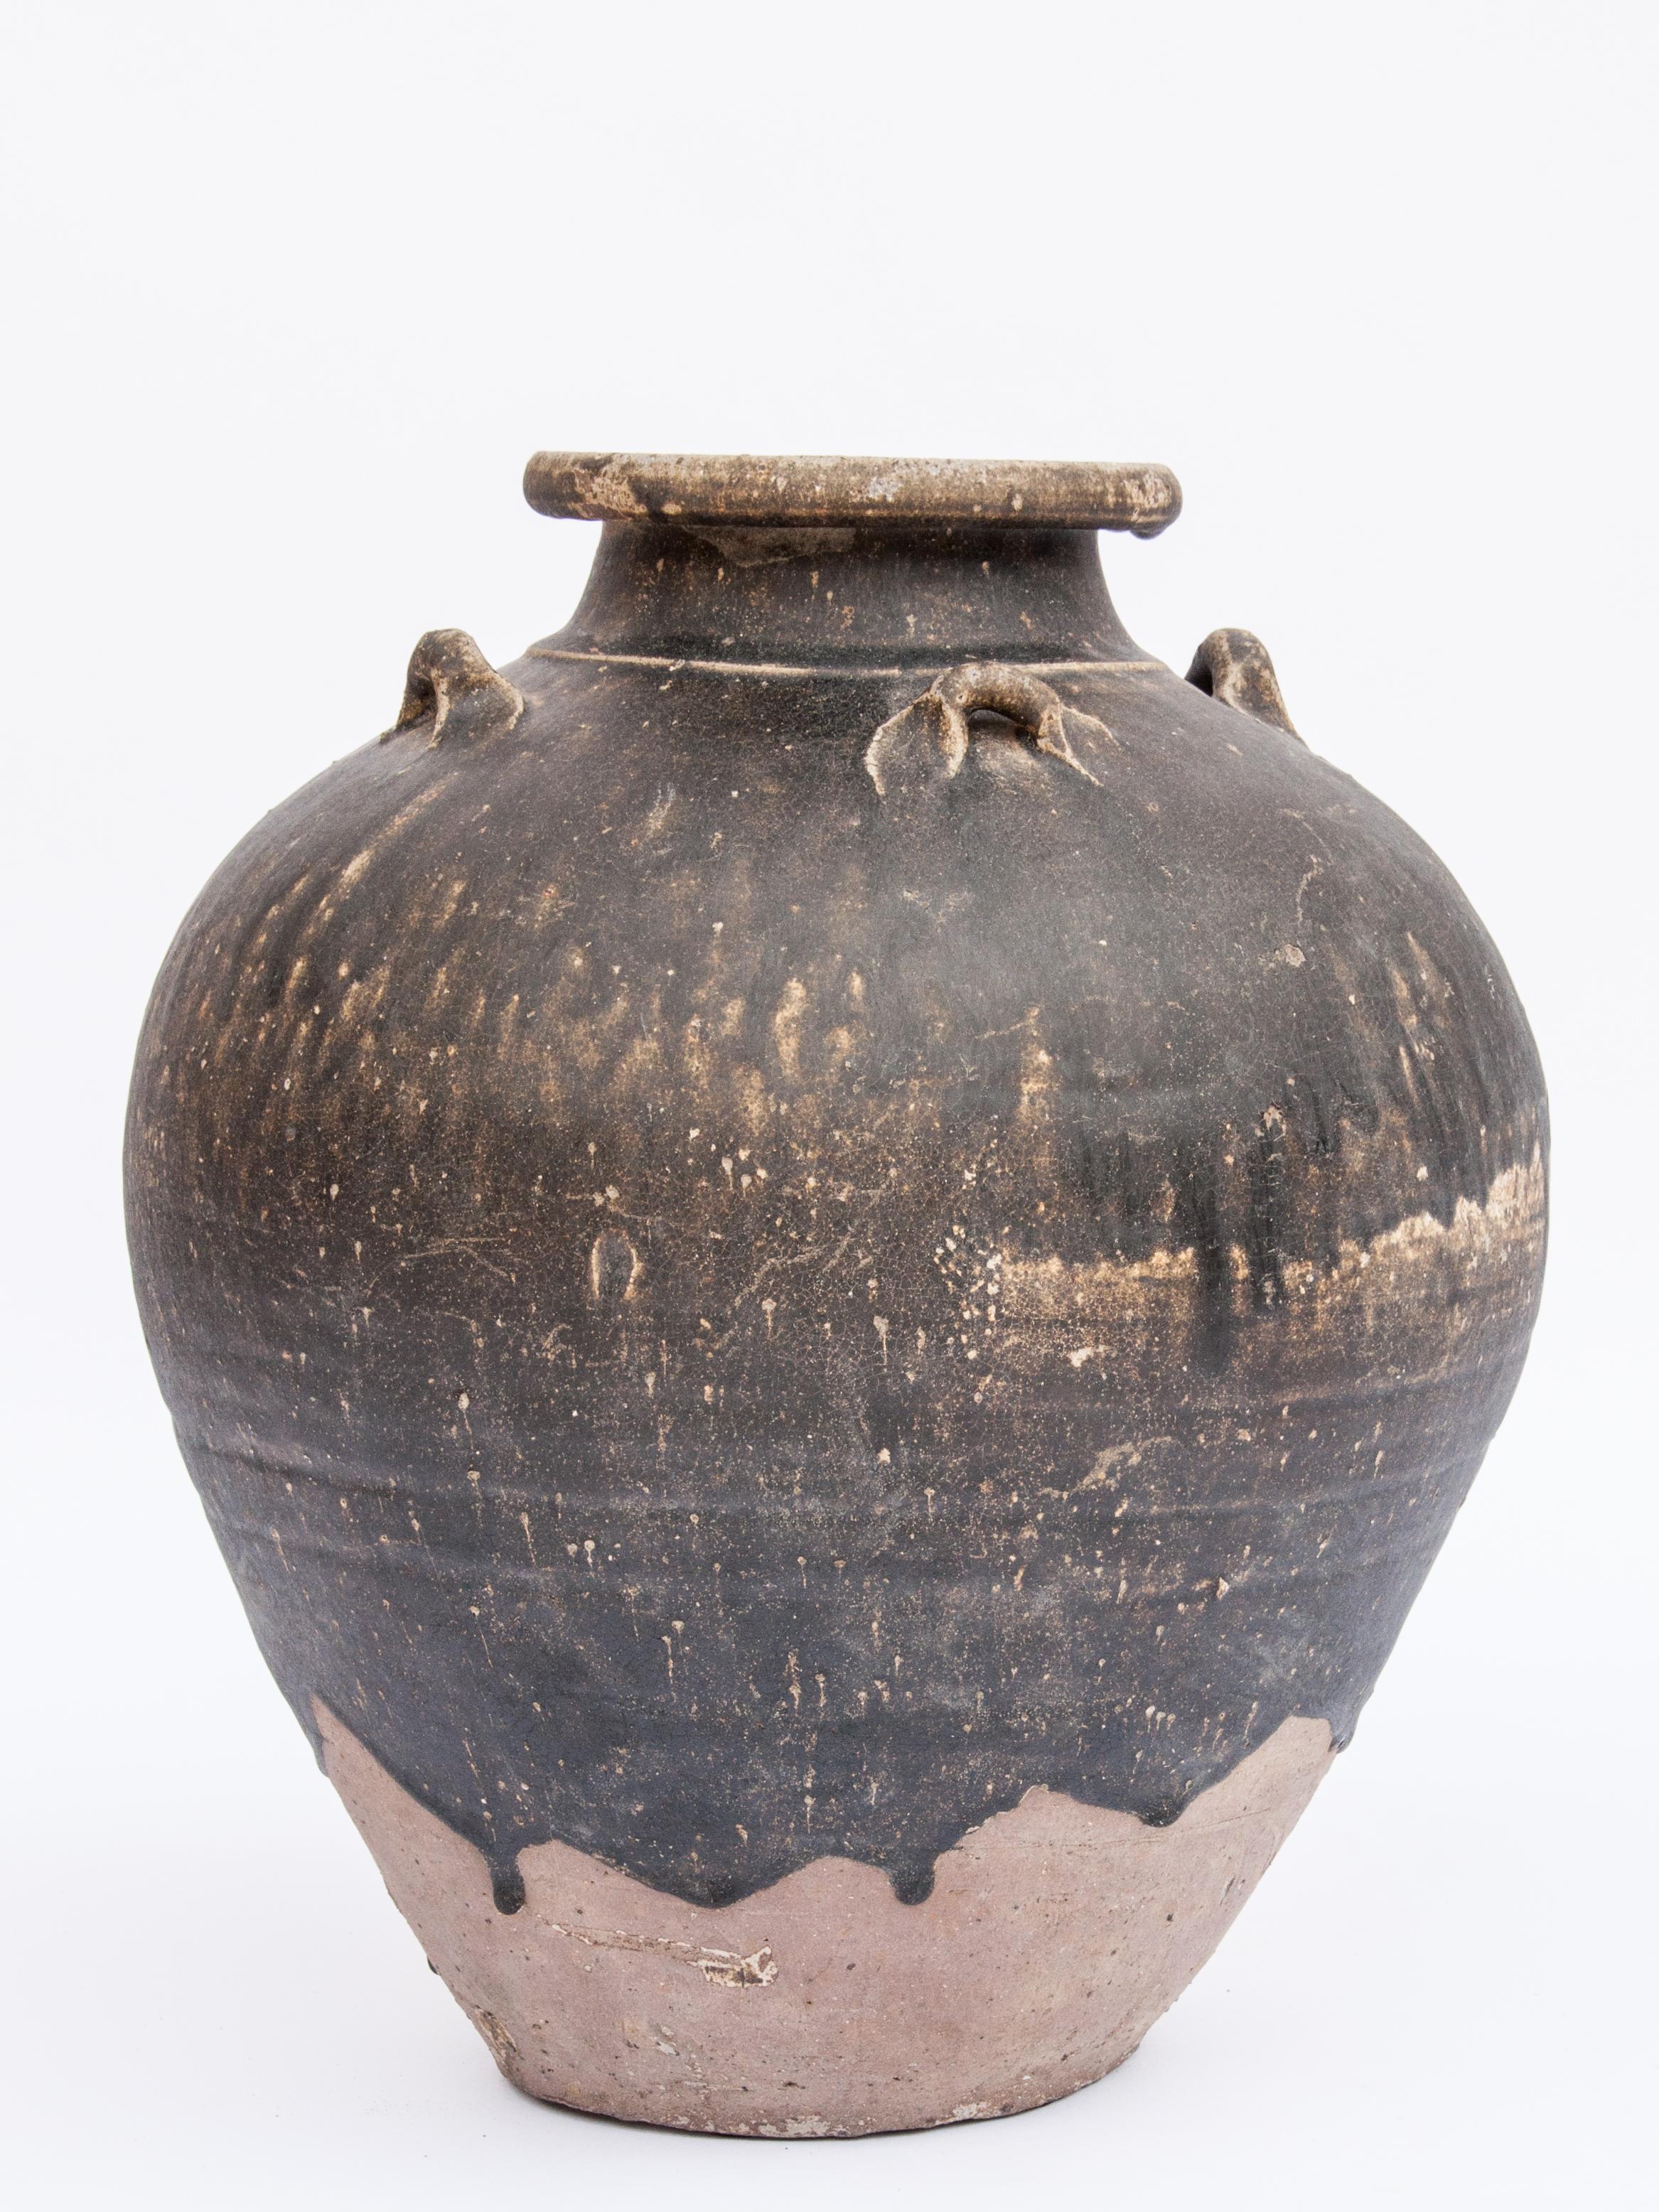 Other Old Ceramic Jar from North Thailand. 14th - 16th Centuries. 14.75 Inches Tall